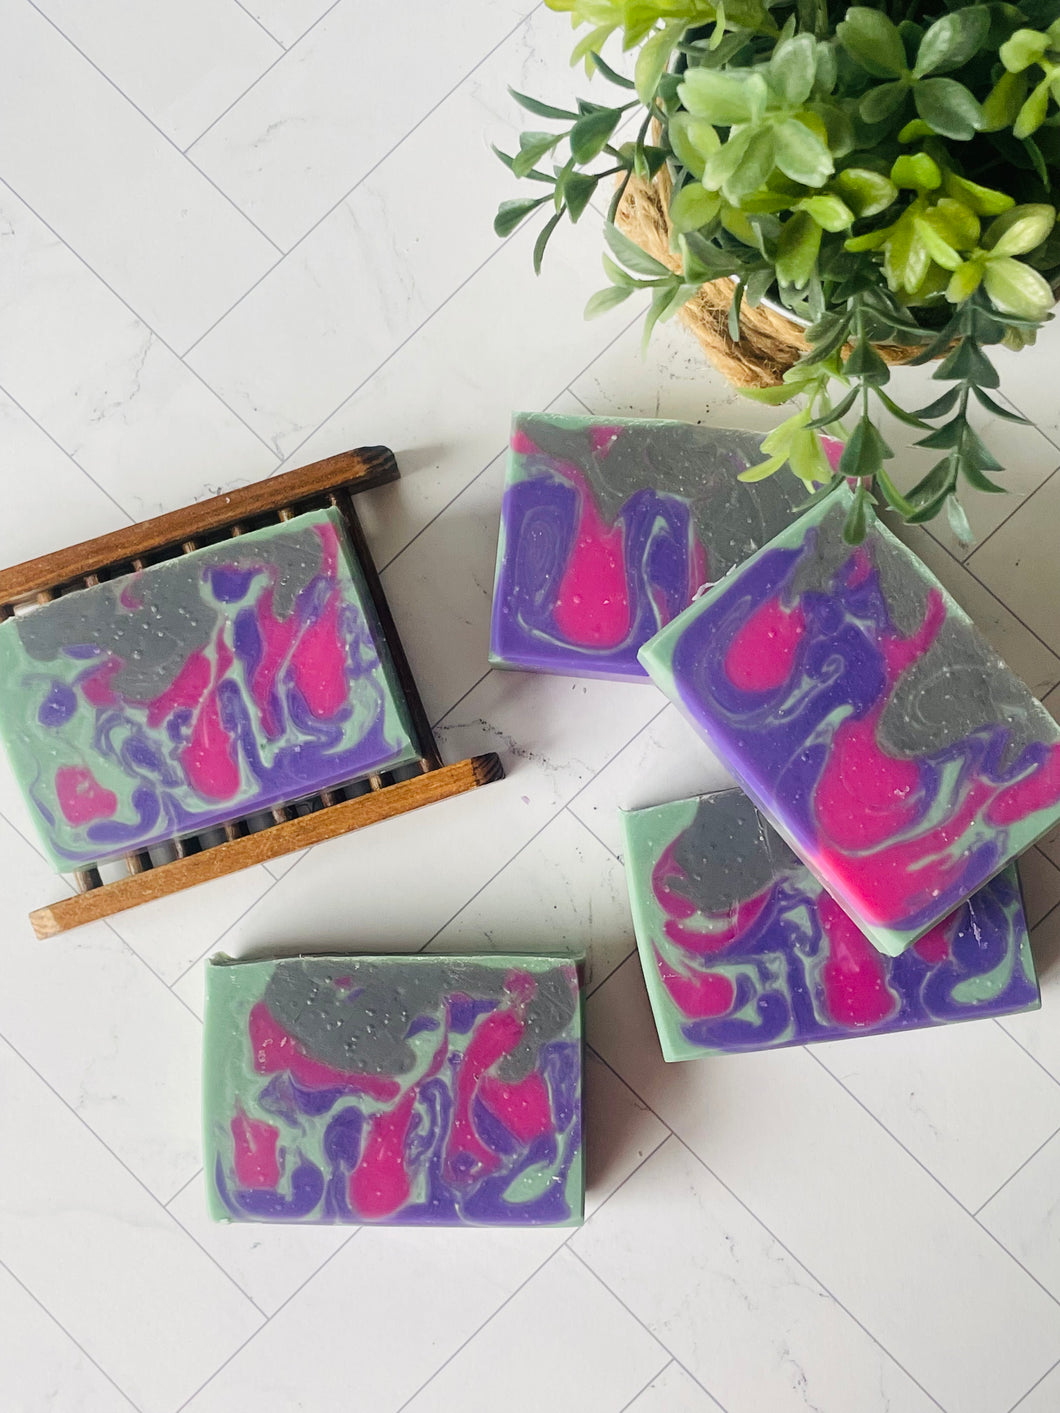 MOON FLOWER HANDCRAFTED SOAP